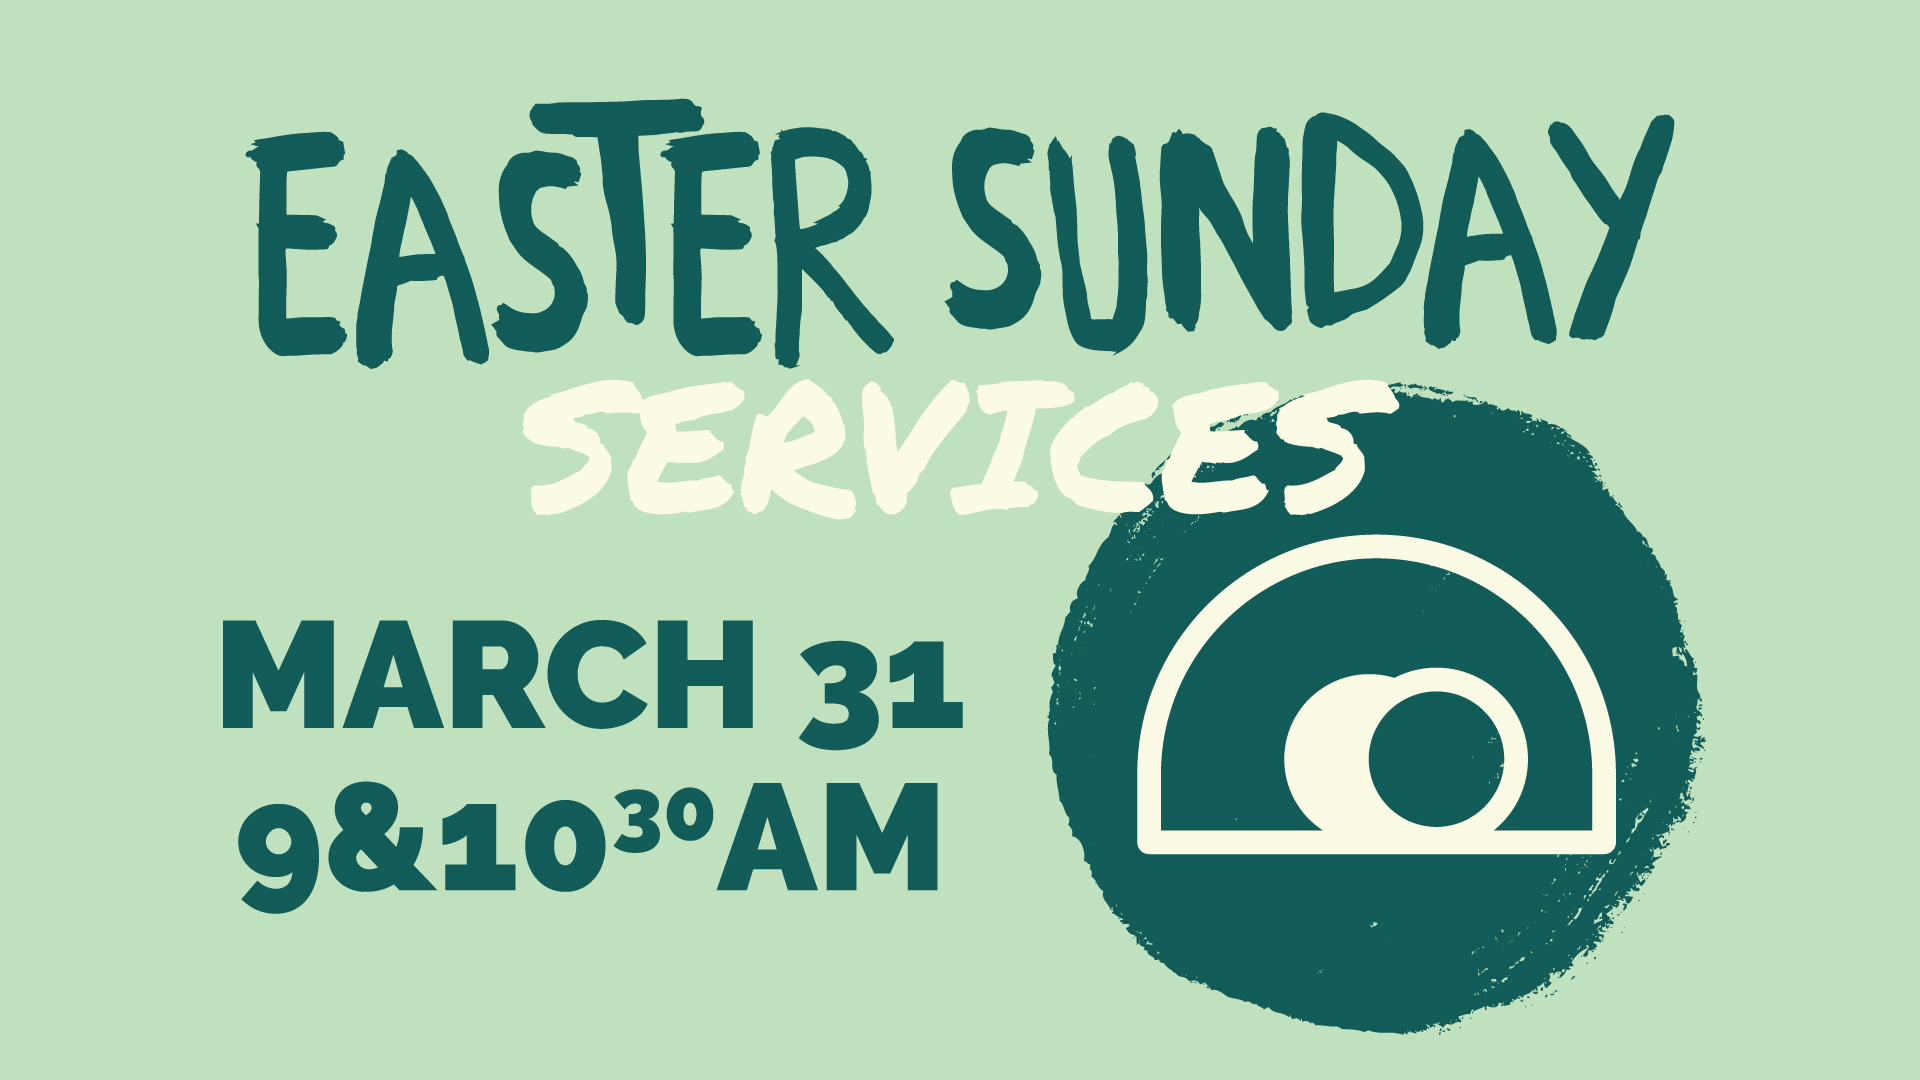 Easter Sunday Services | March 31 at 9 and 10:30am.